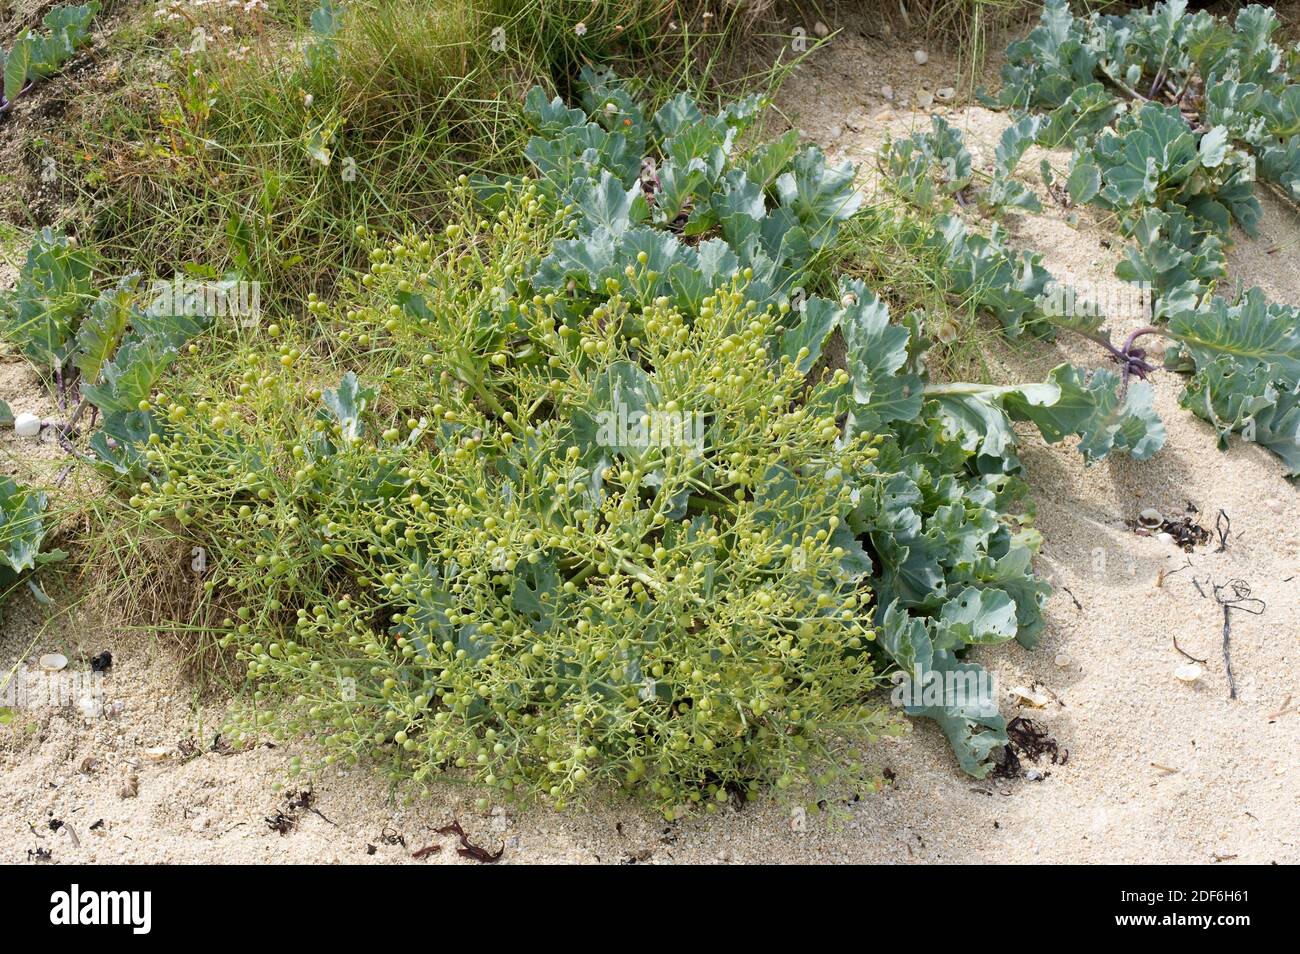 Sea kale (Crambe maritima) is halophytic perennial plant native of Europe coastline. This photo was taken in Britanny, France. Stock Photo